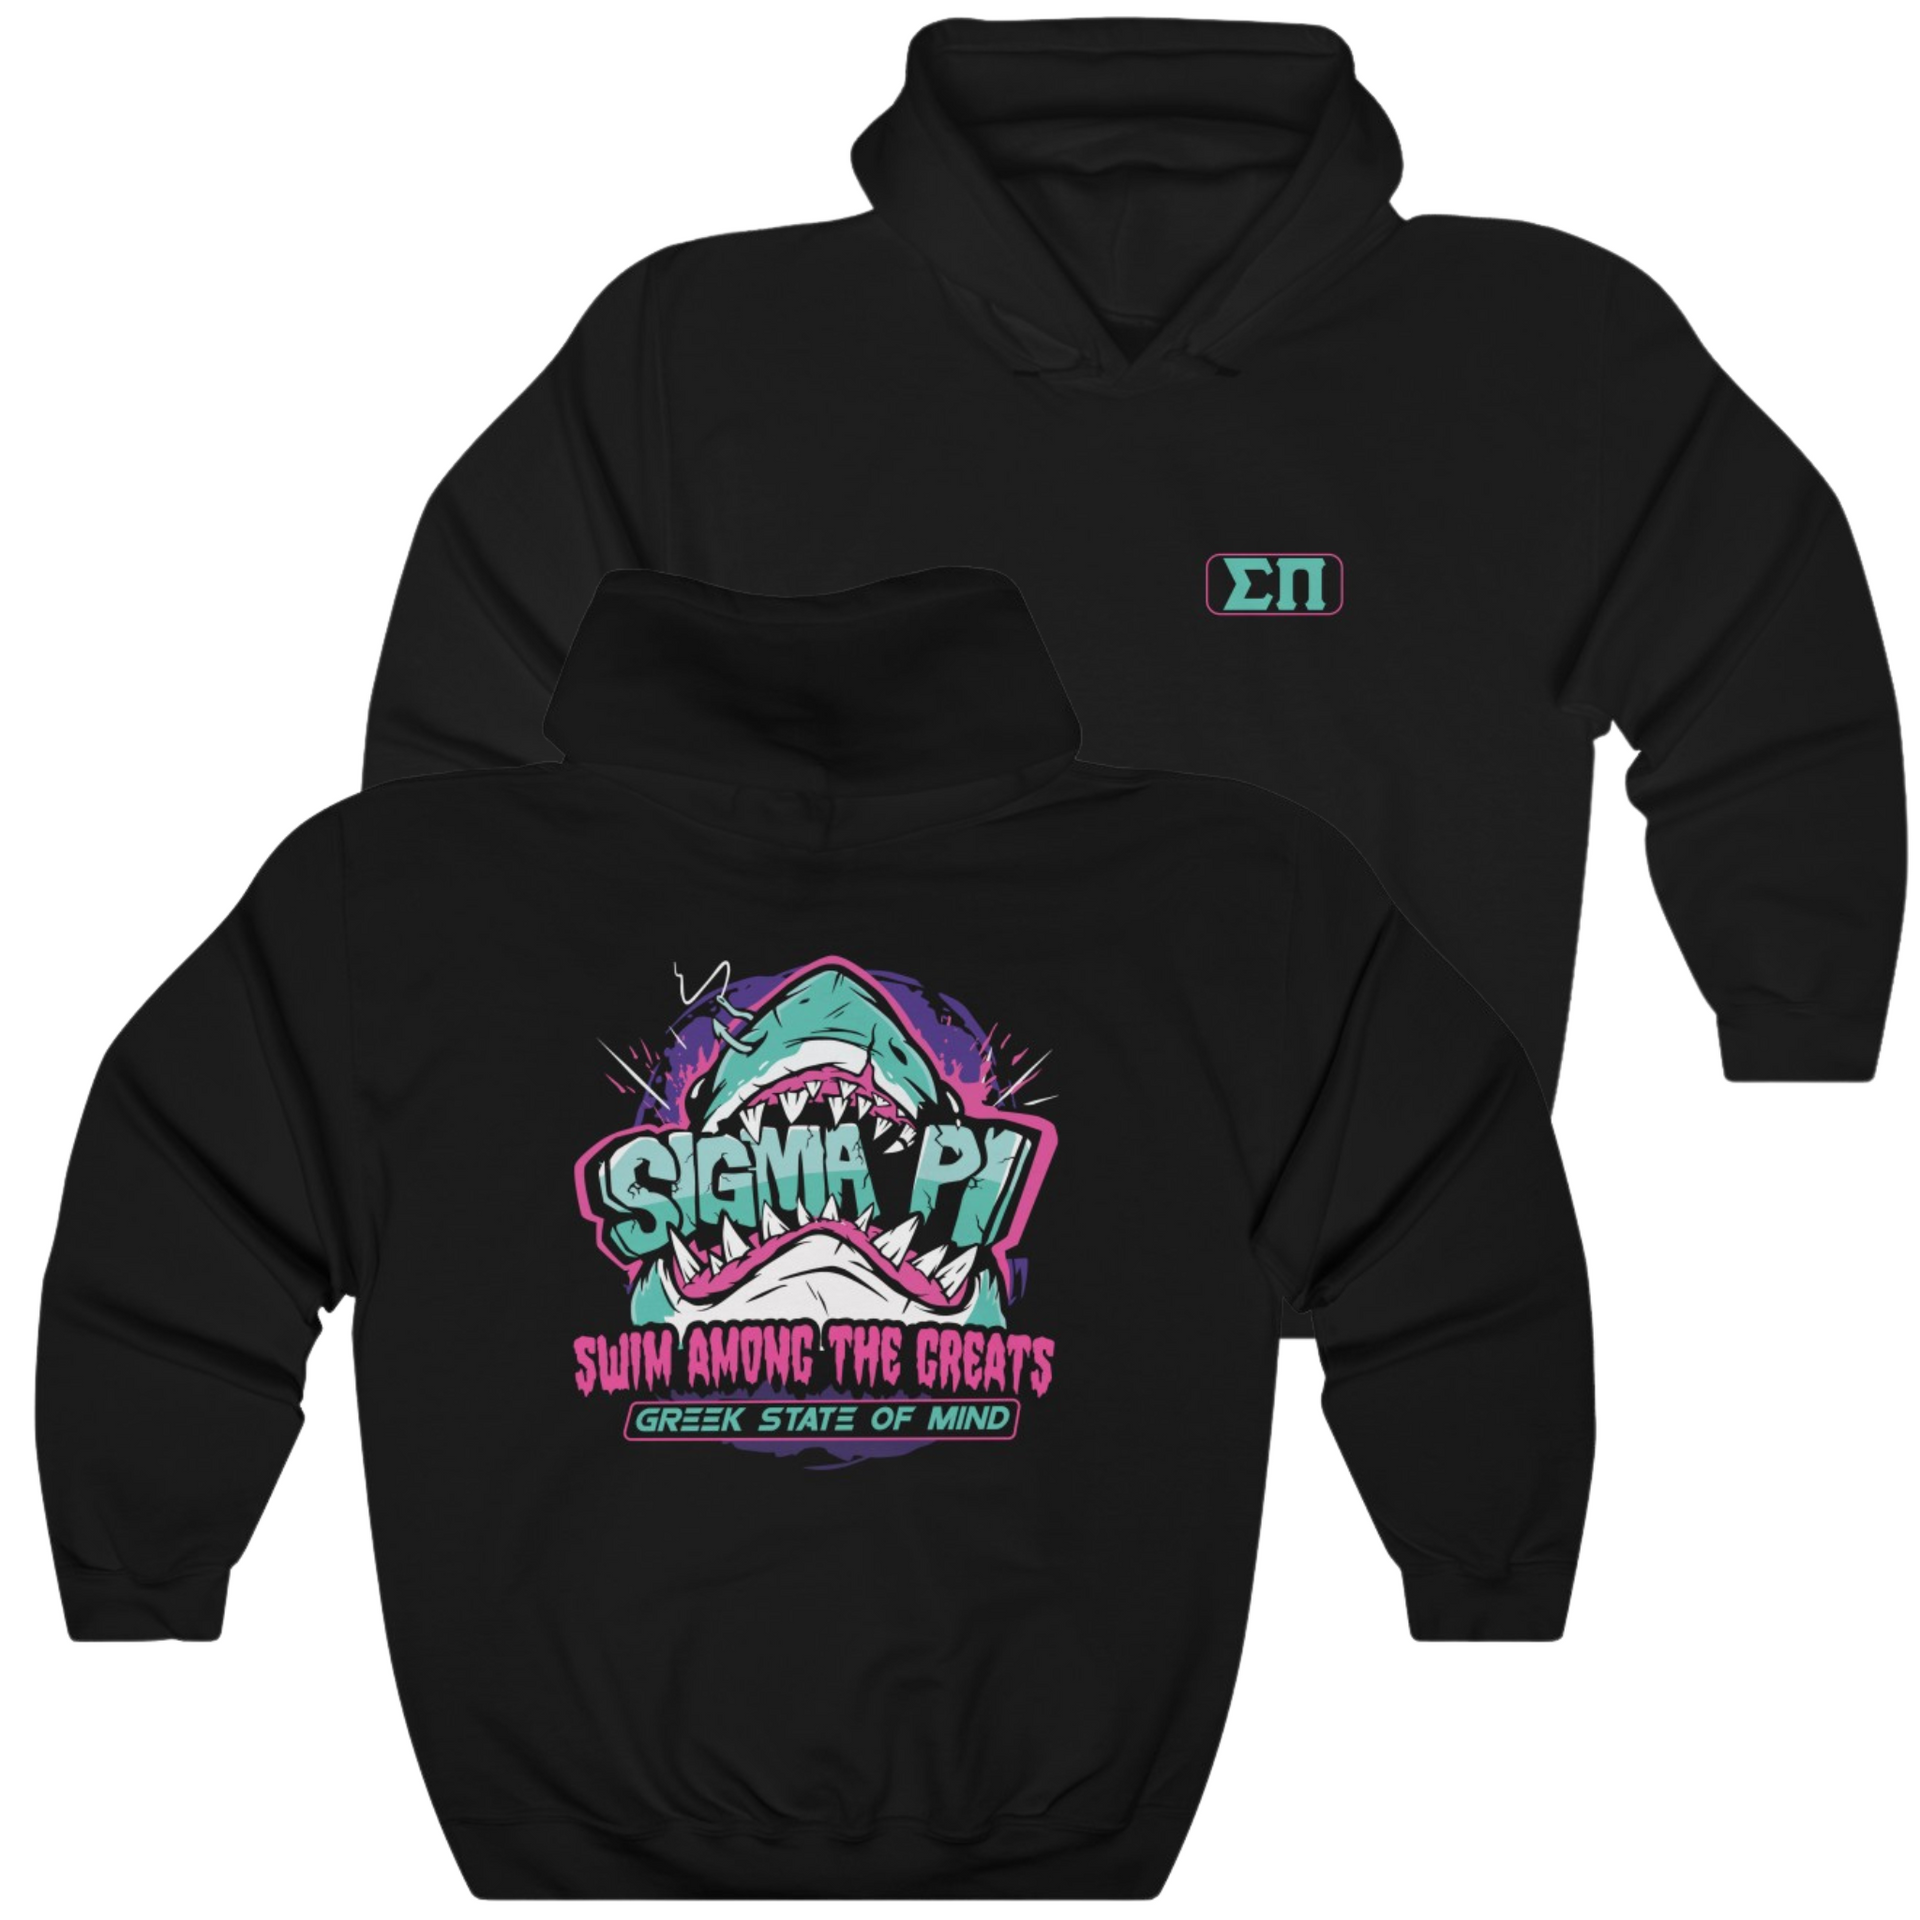 Black Sigma Pi Graphic Hoodie | The Deep End | Sigma Pi Apparel and Merchandise 